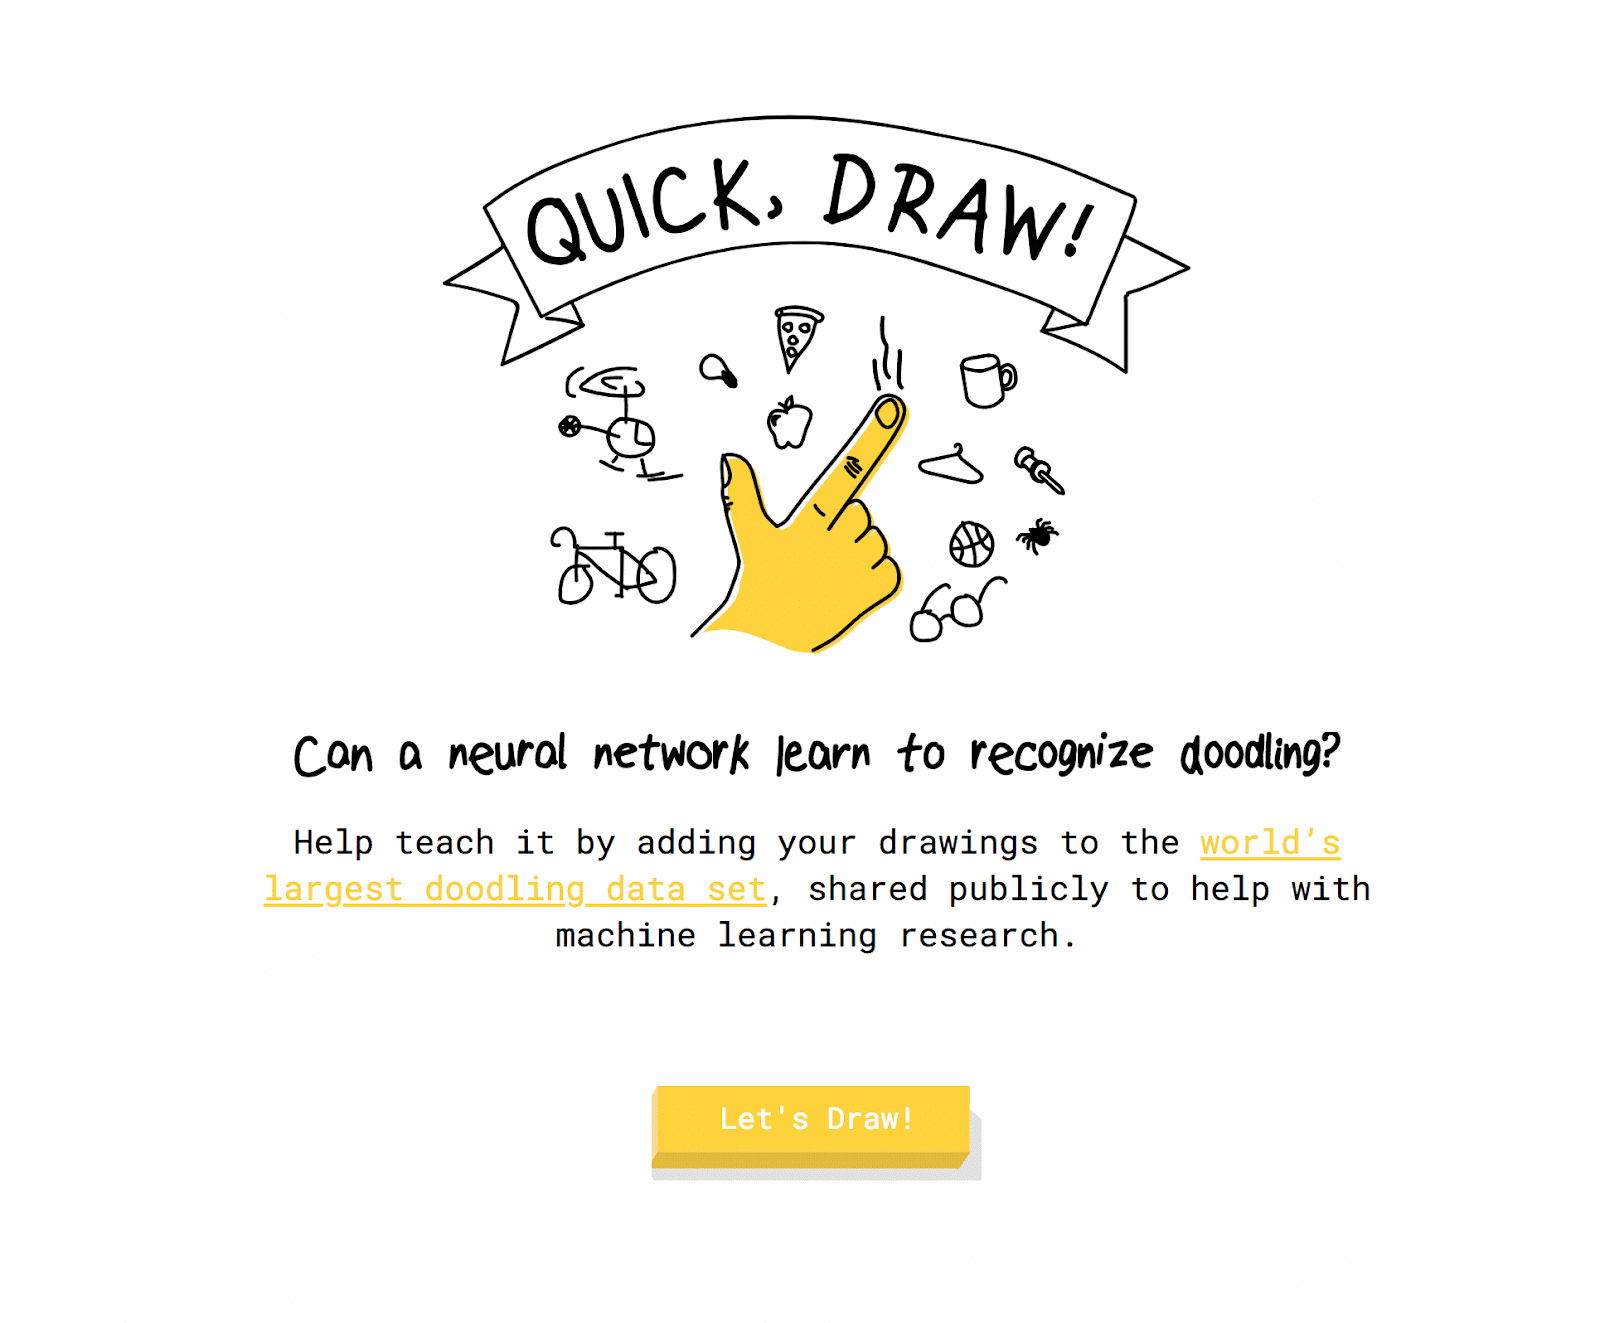 Introducing the Kaggle “Quick, Draw!” Doodle Recognition Challenge – Google  Research Blog